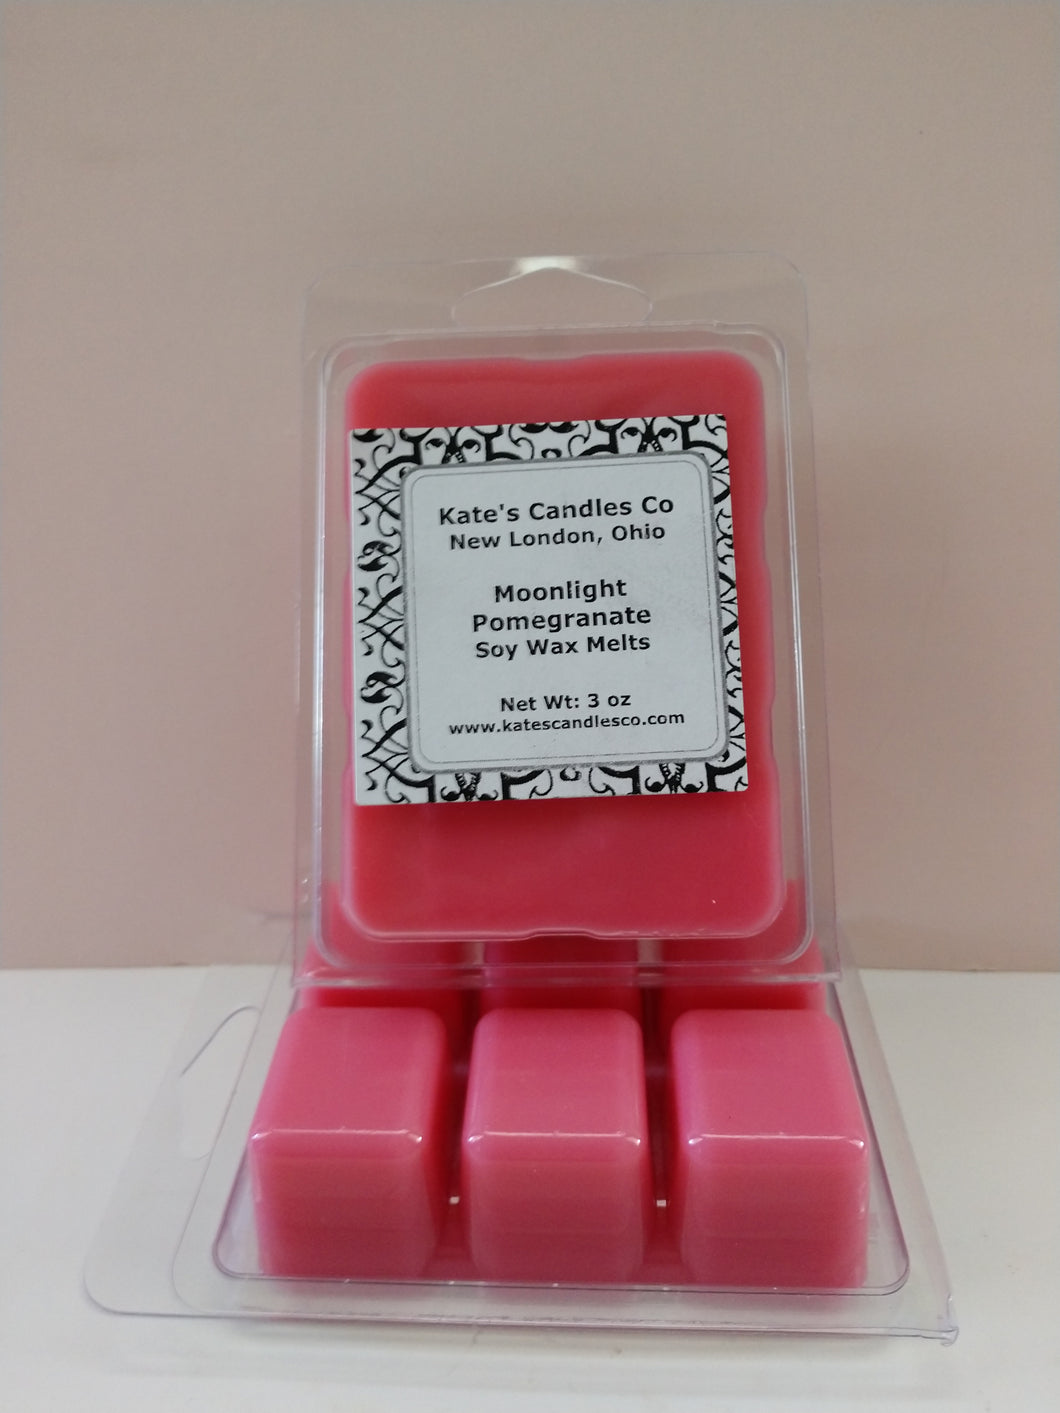 Moonlight Pomegranate Soy Wax Melts For Electric or Tealight Wax Warmers - Kate's Candles Co. Soy Candles